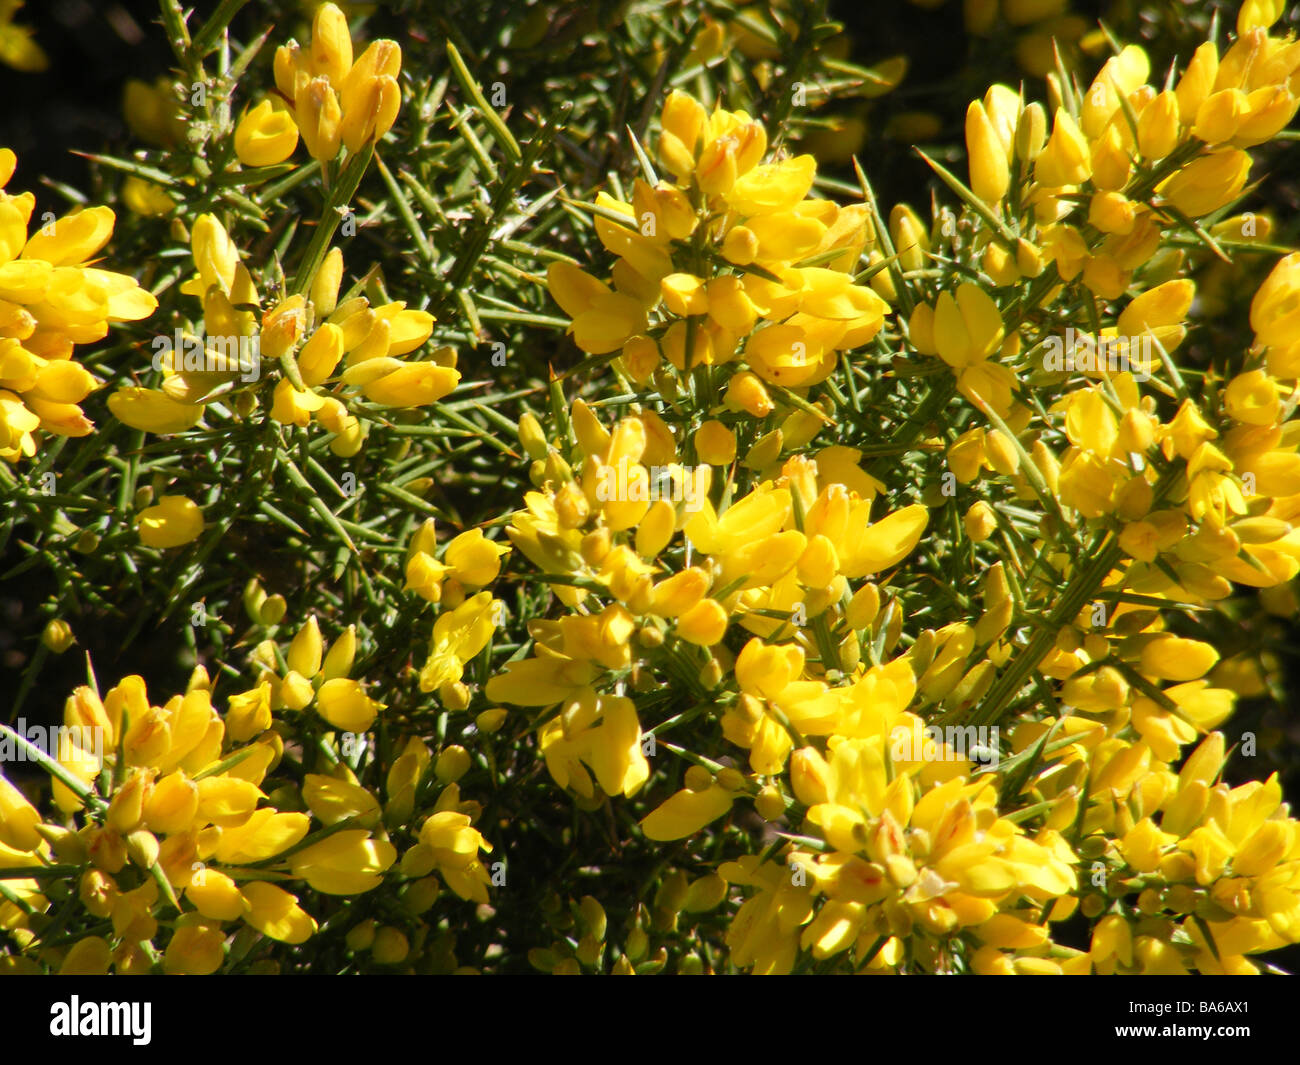 25 Gorse Hedging Bush,Prickly Furze Plants,Fragrant Yellow Whin Evergreen Hedge 